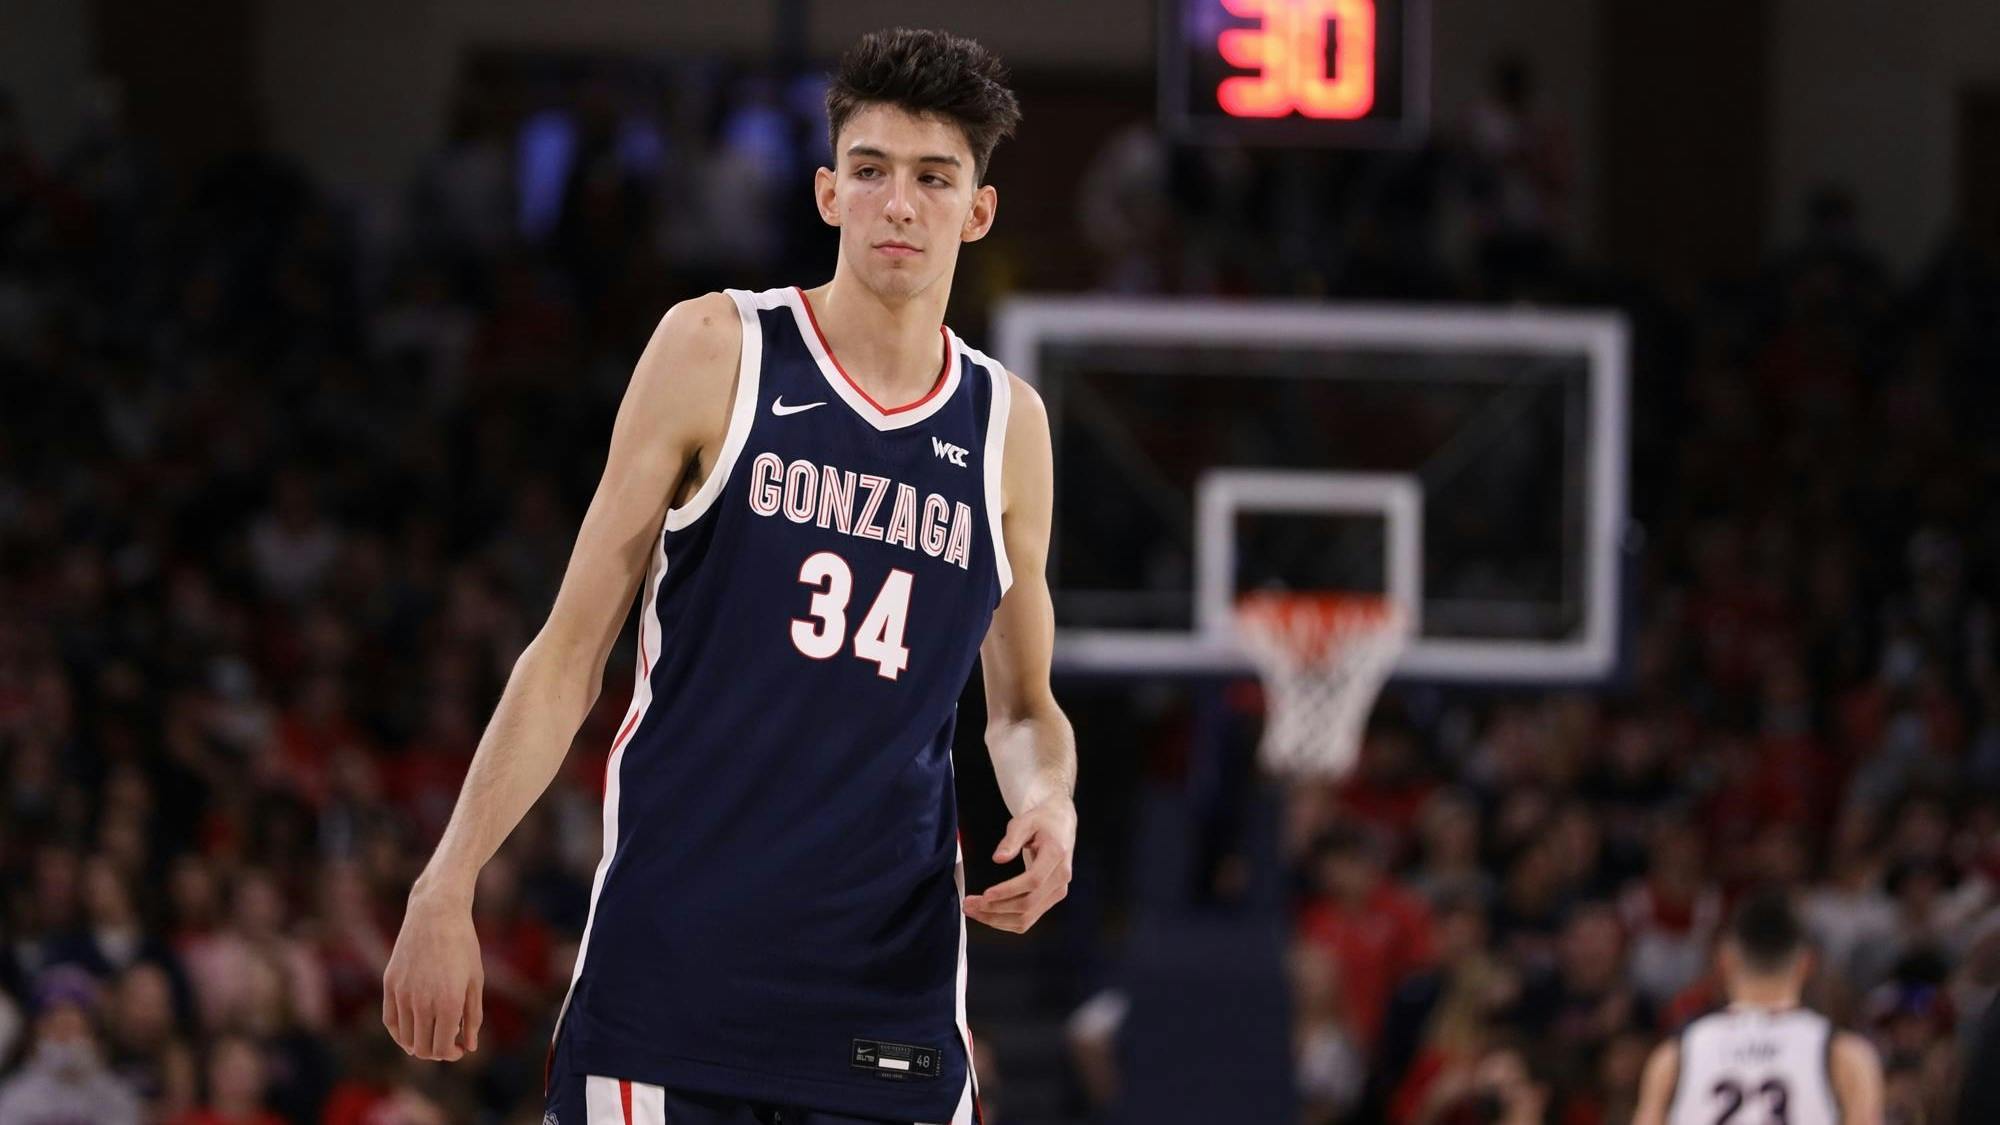 Chet Holmgren, another freshman sensation from Minnesota, ready to take  over college hoops at Gonzaga | Star Tribune